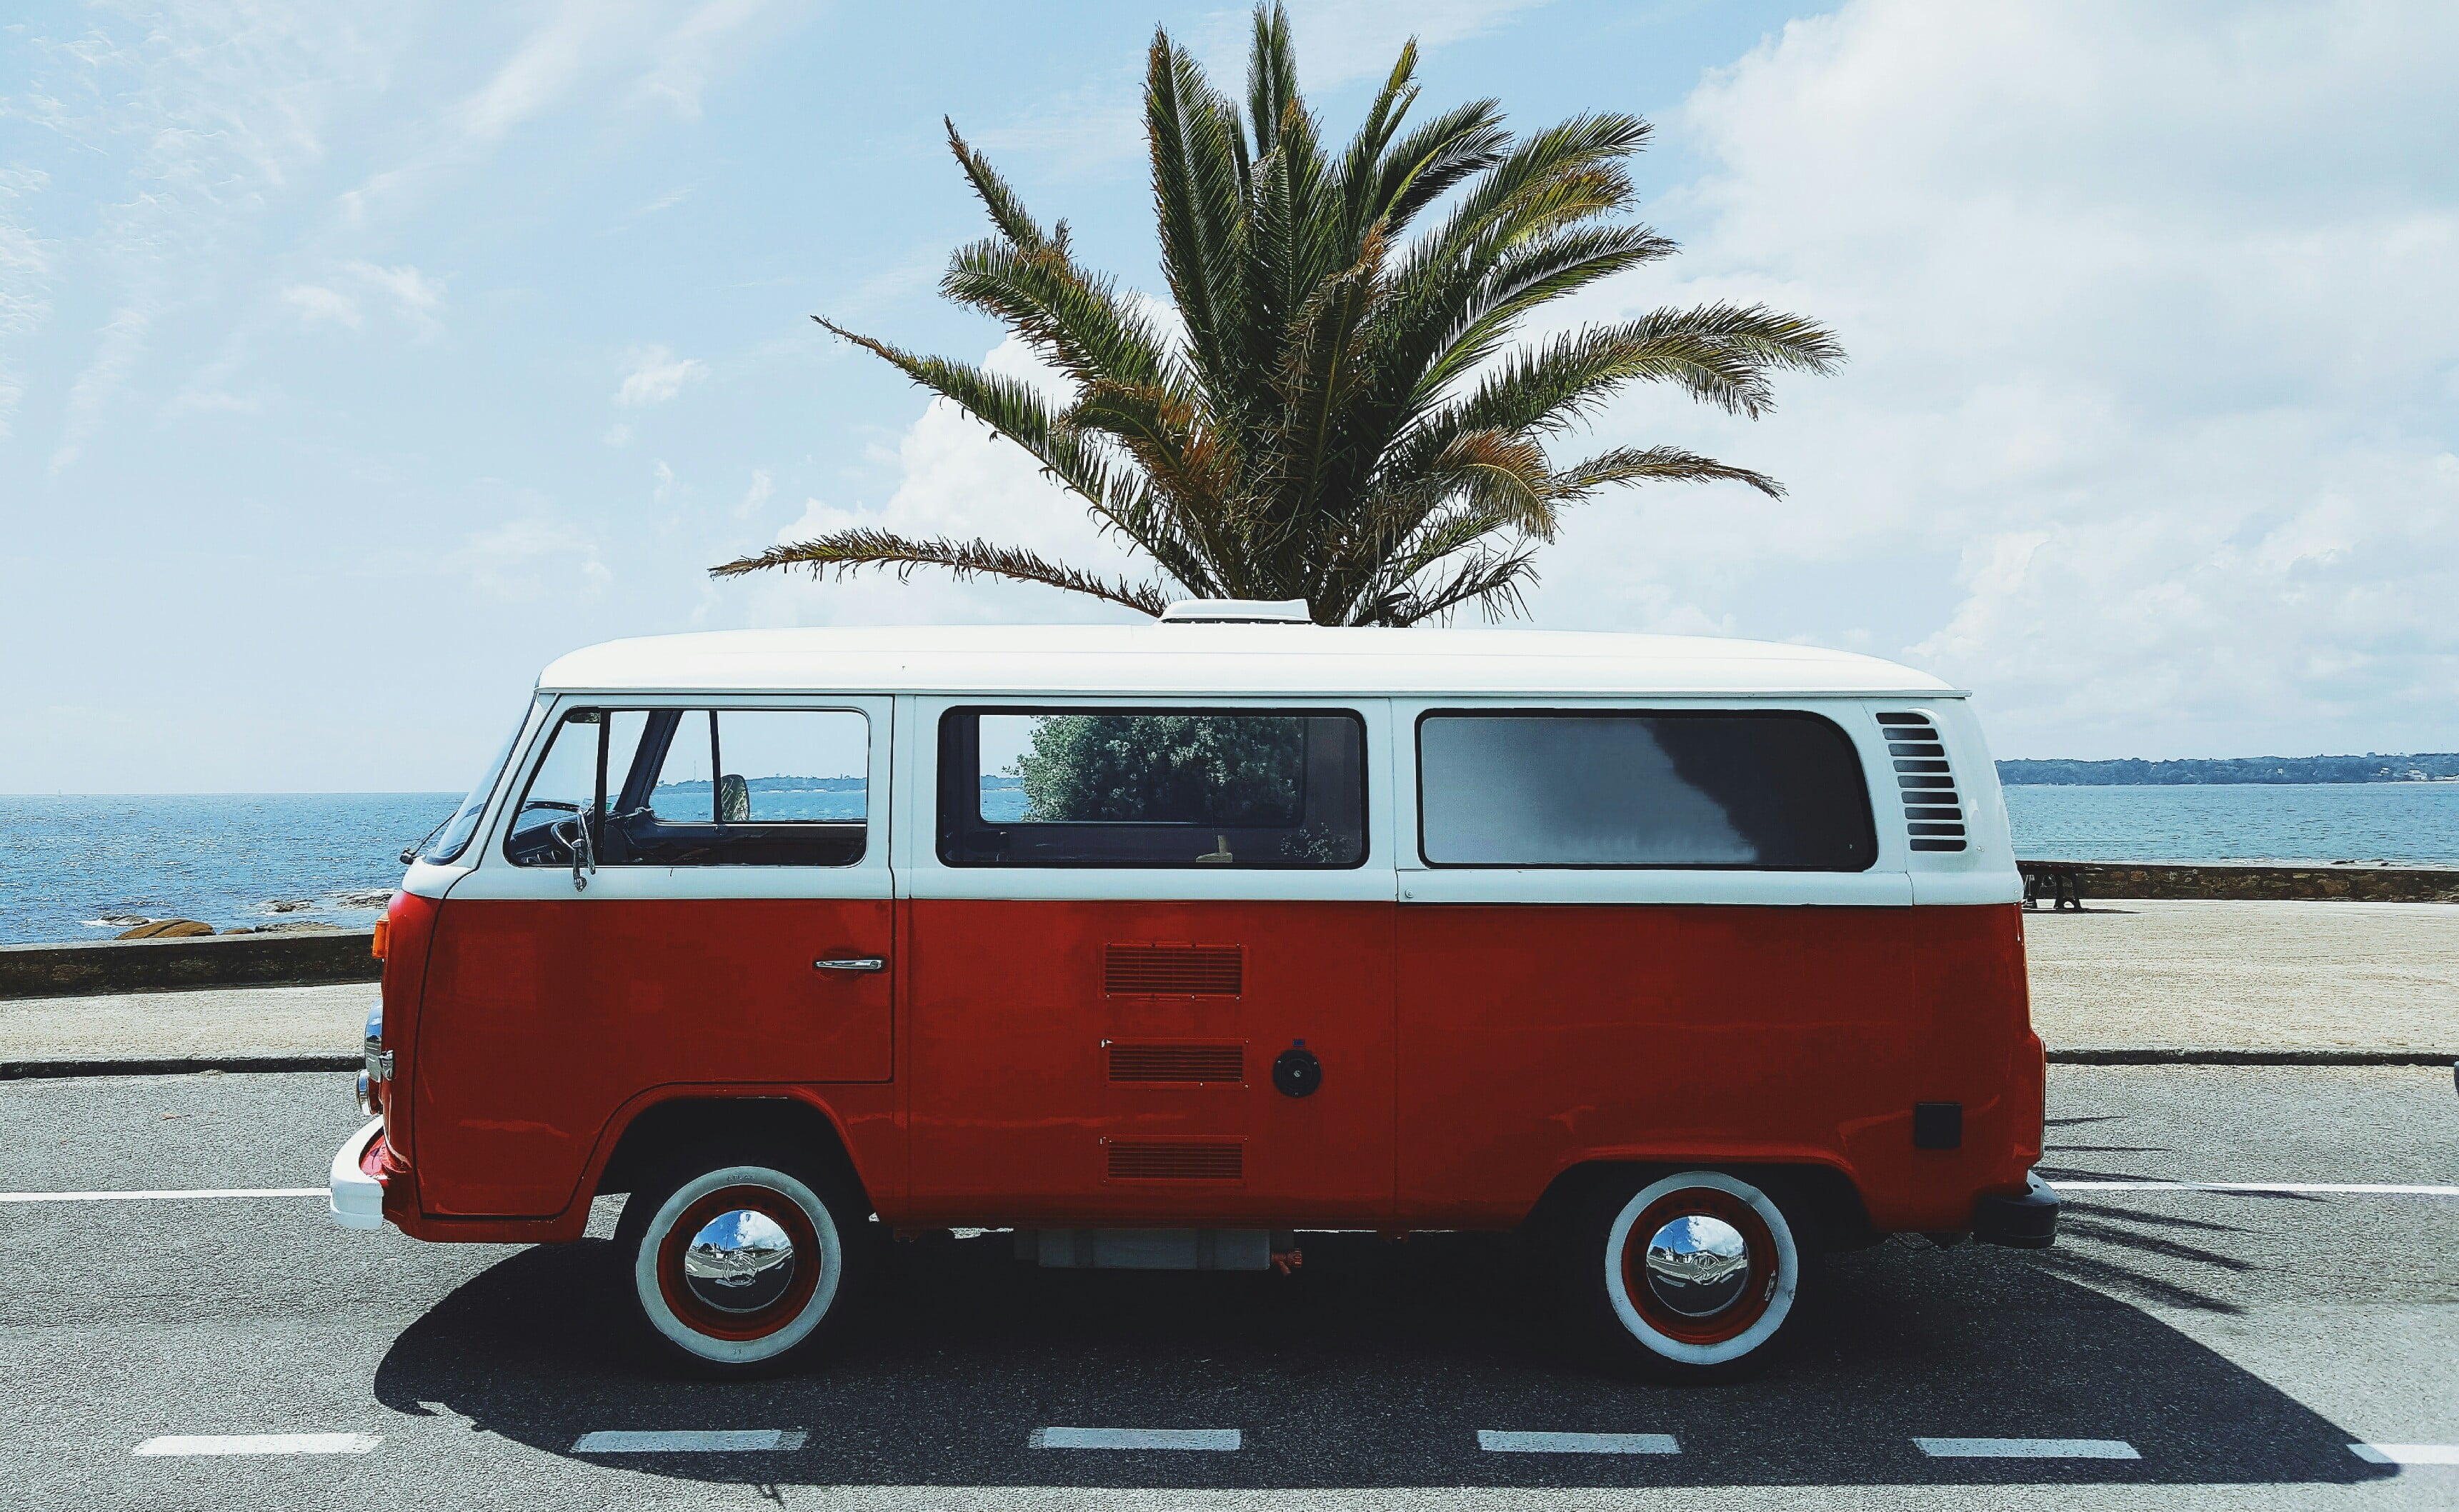 white and red Volkswagen van, vw bus, red, France, beach